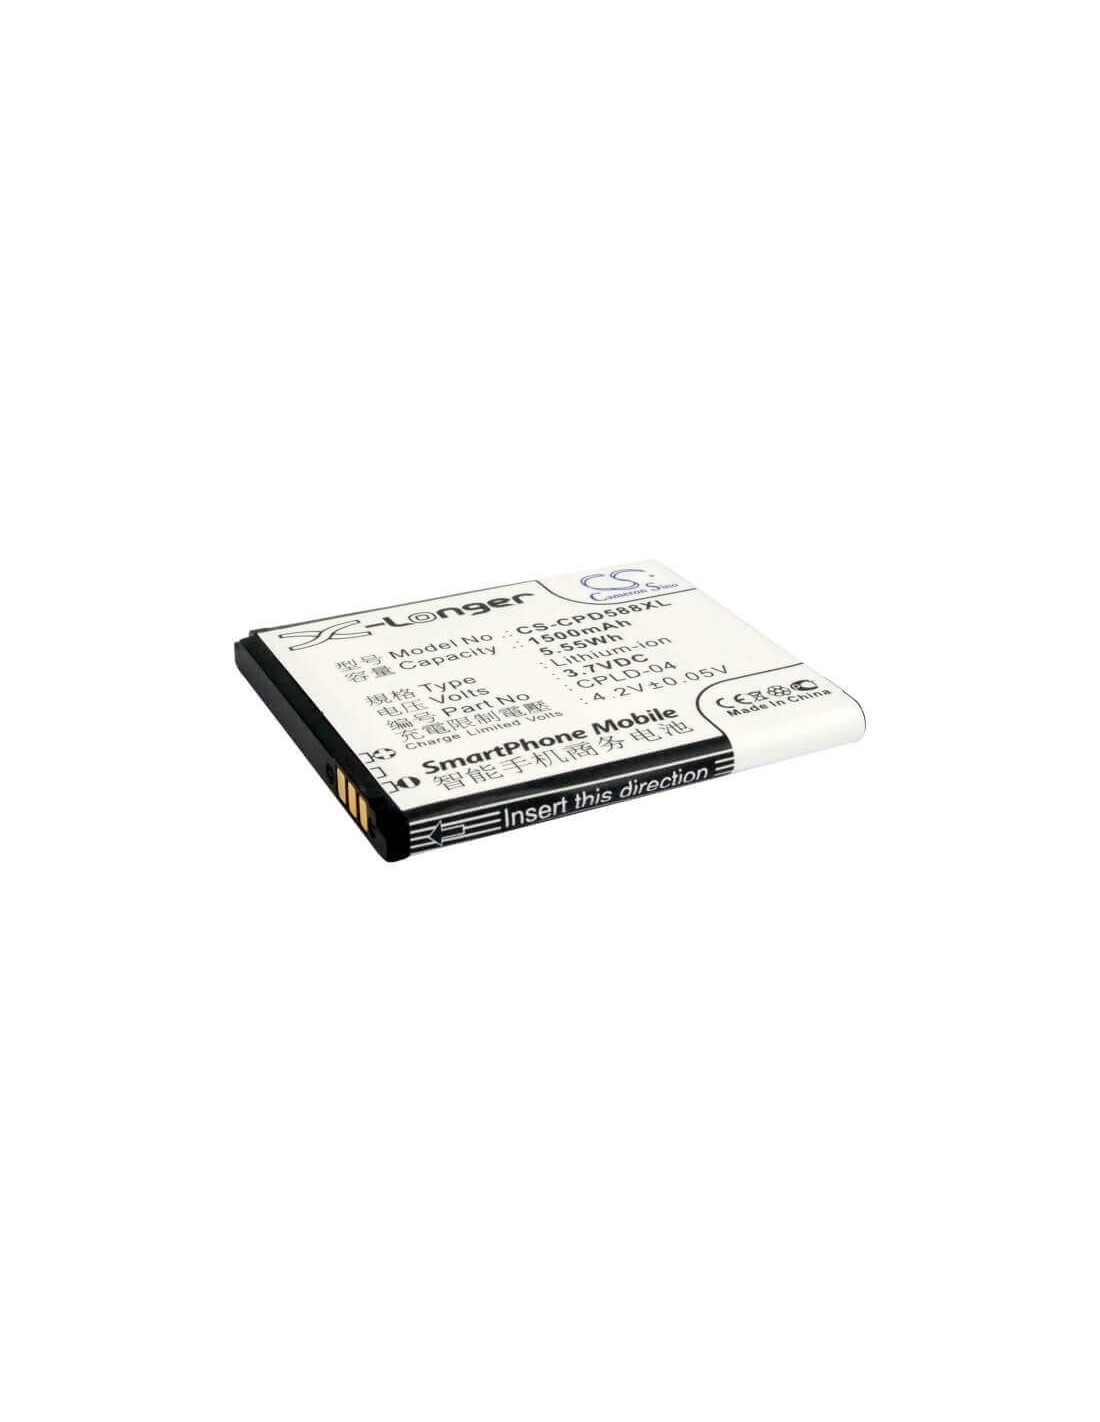 Battery for Coolpad 5880 3.7V, 1500mAh - 5.55Wh